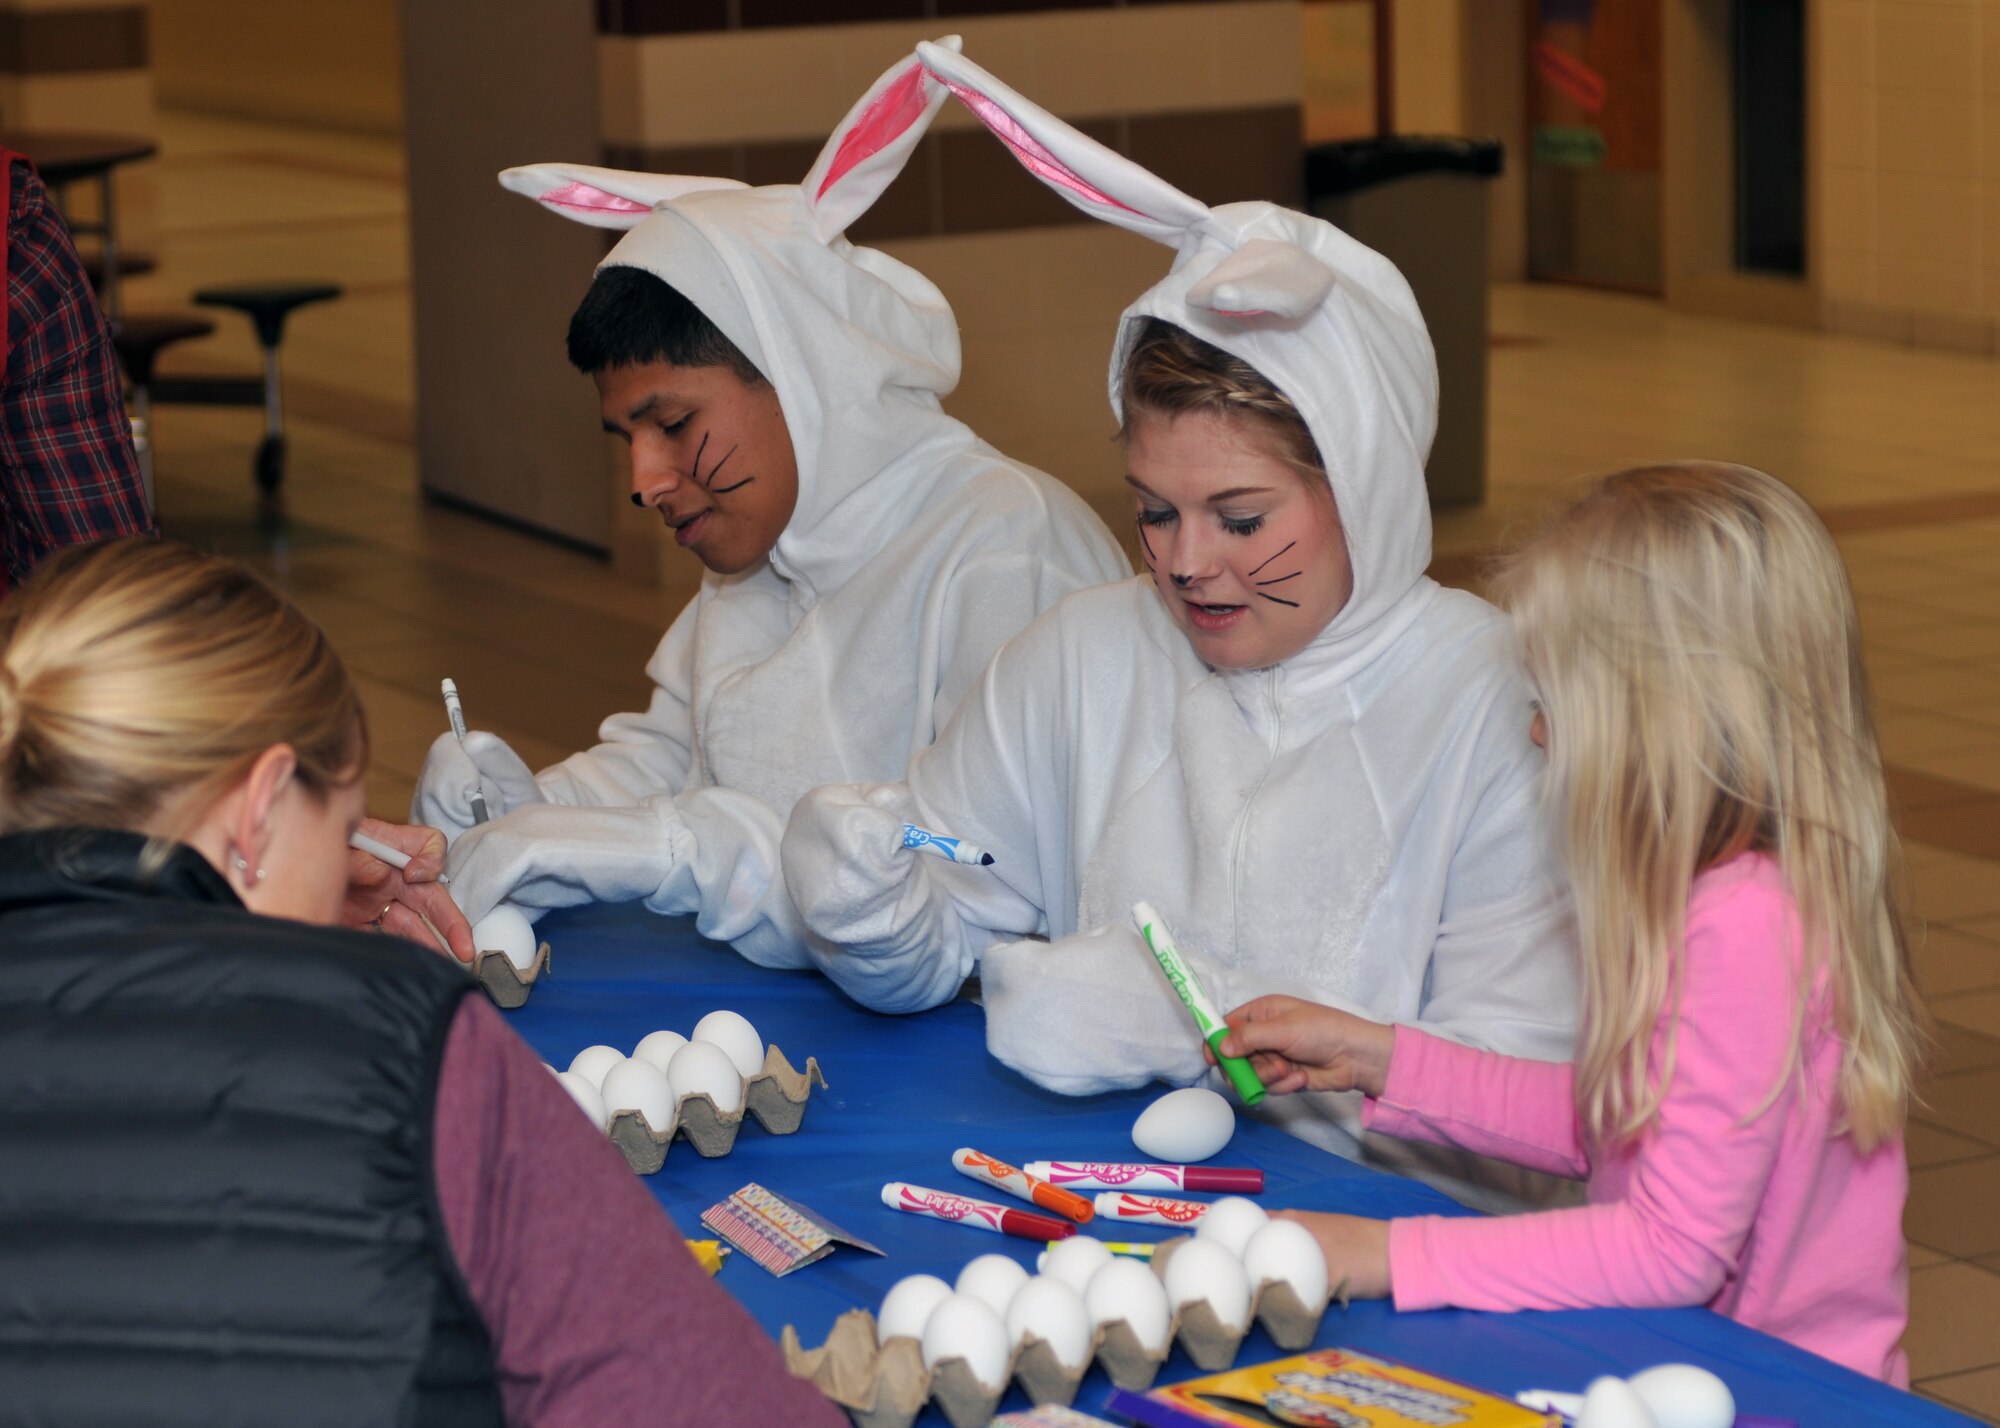 AB Eric Jeronimo and SSgt. Jessie Motley, 185 Air Refueling Wing, Force Support Squadron, Sioux City, Iowa, sport bunny costumes while helping the younger children color Easter eggs at the Spring Fling, at the Sergeant Bluff middle school on Saturday, 3 March, 2018.  The Spring Fling is a morale building event hosted by the 185th ARW Bats Family Club.  (U.S. Air National Guard photo by Master Sgt. Bill Wiseman/Released)